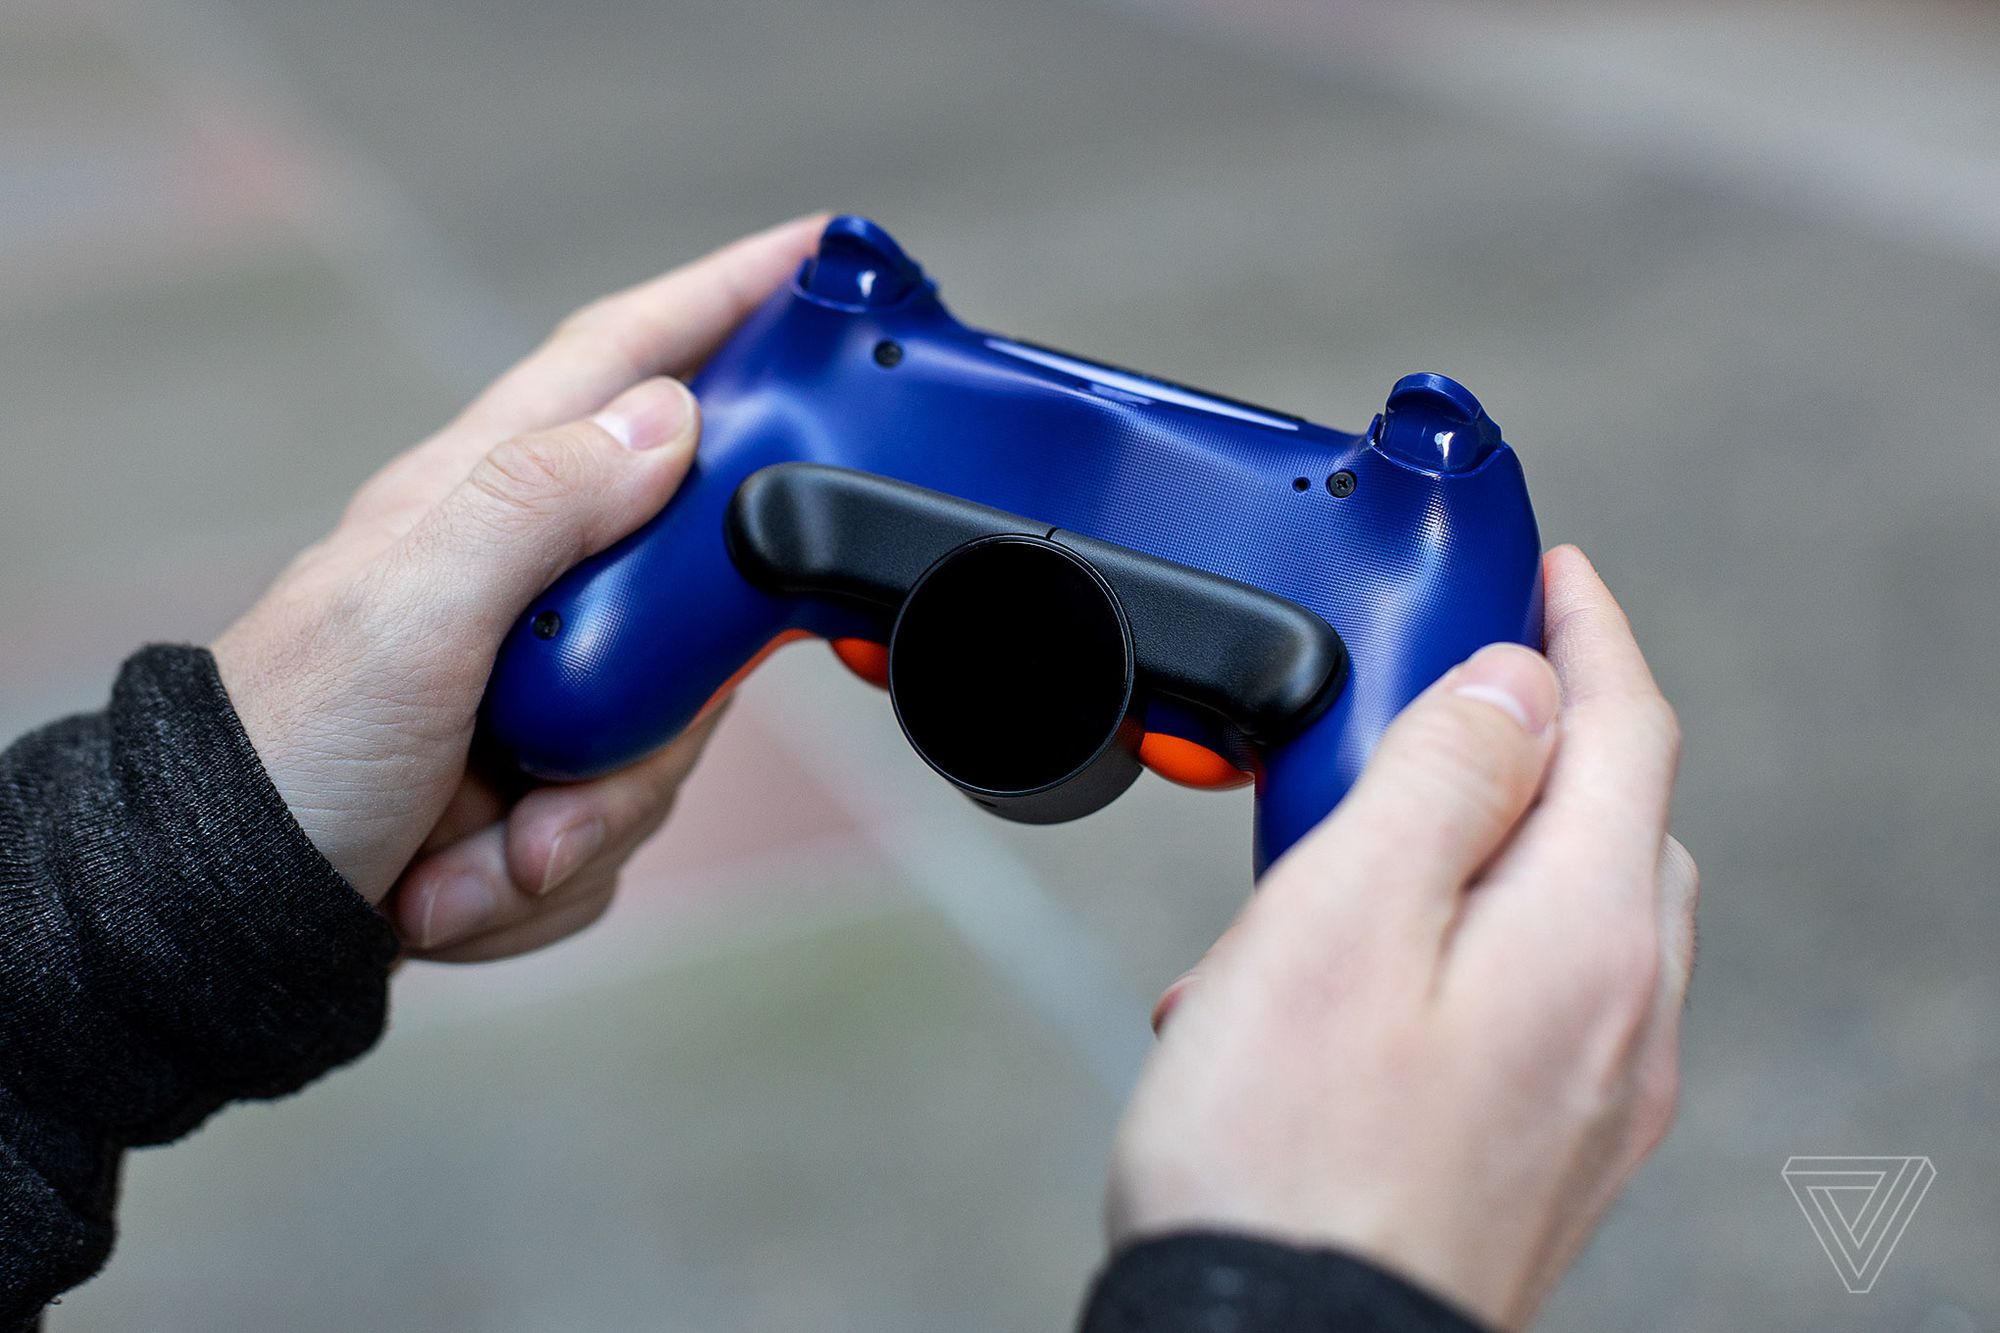 Imperativo Centro comercial Gruñido This $30 PS4 accessory is the cheapest way to get a great pro controller -  The Verge